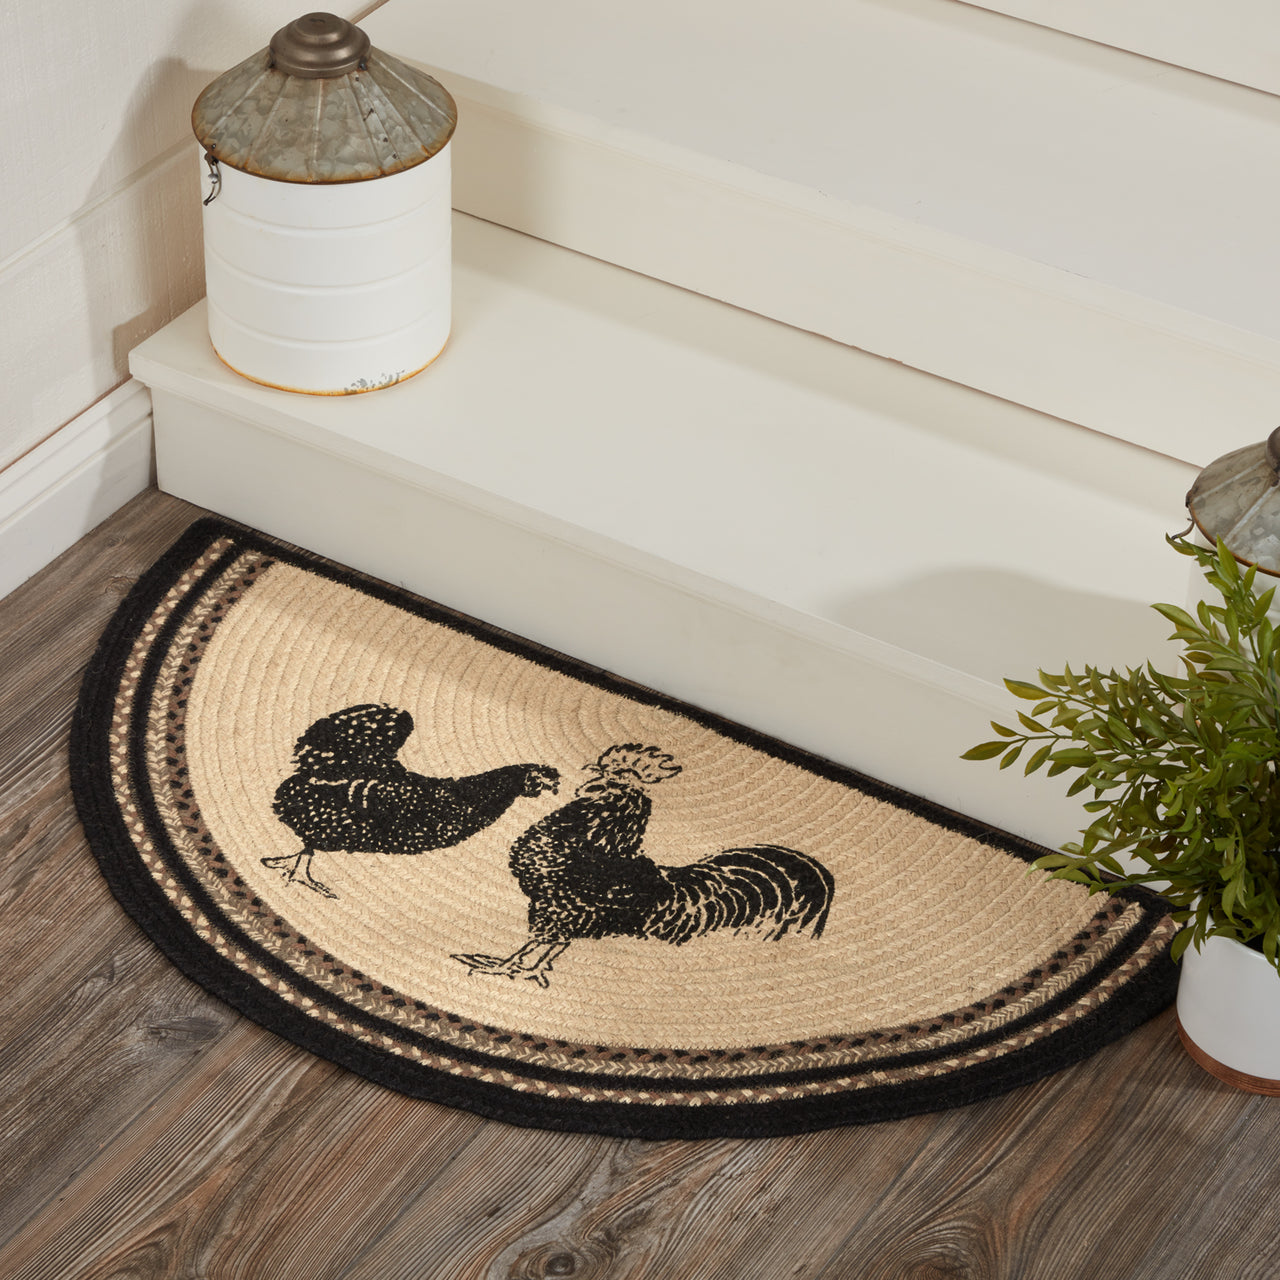 Sawyer Mill Charcoal Poultry Jute Braided Rug Half Circle 16.5"x33" with Rug Pad VHC Brands